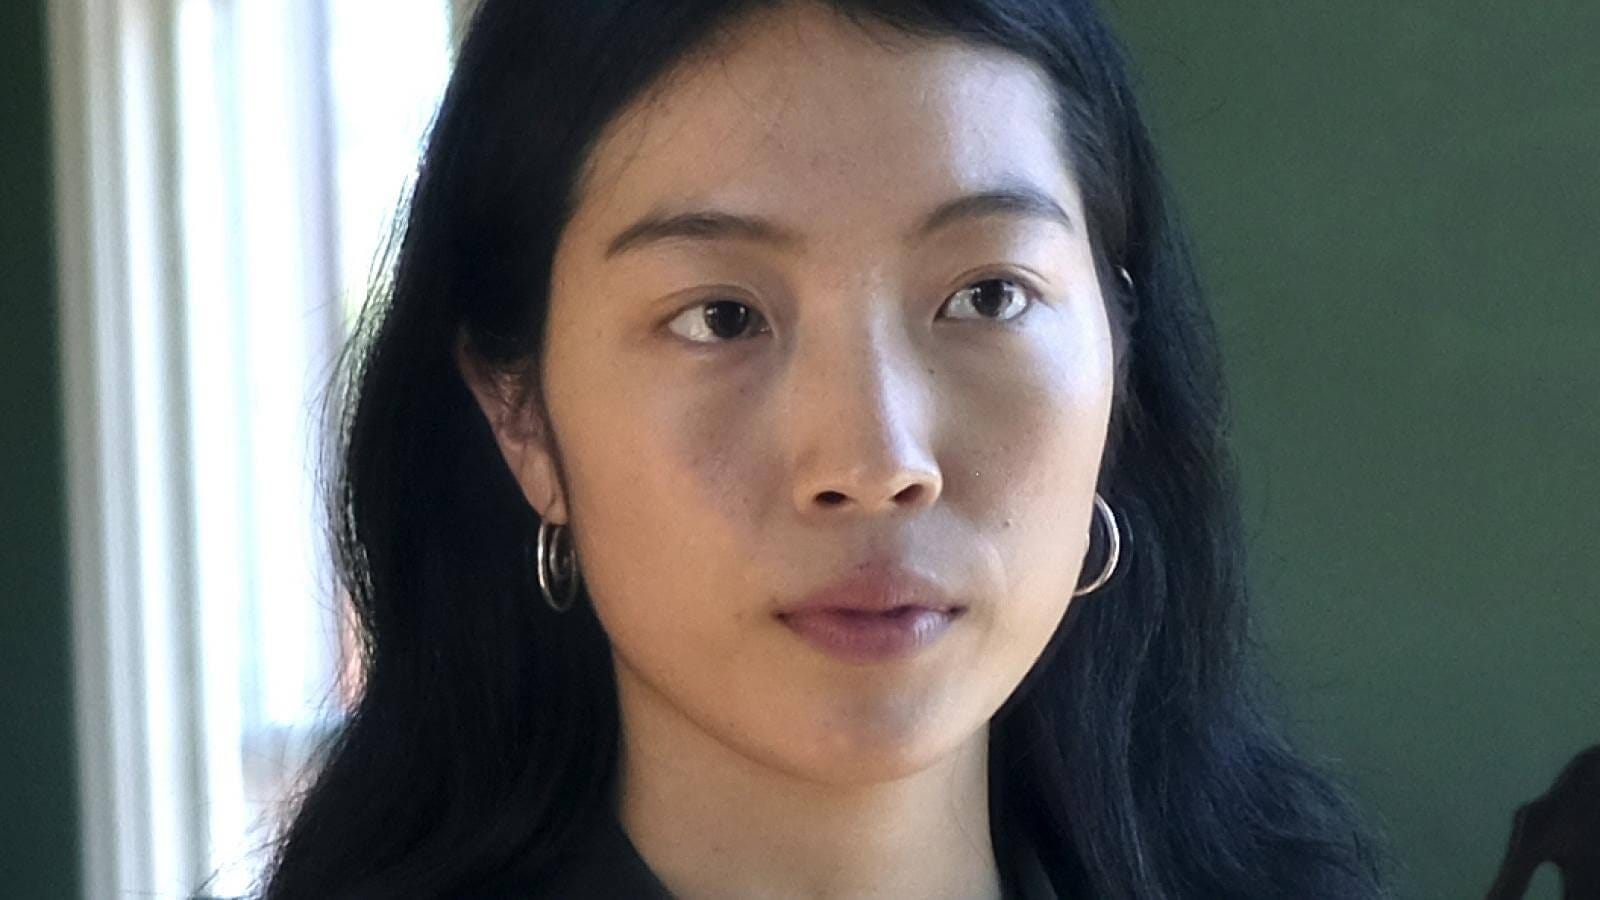 Close-cropped portrait of Mindy Seu, who is wearing silver hoop earrings and looking off to the side